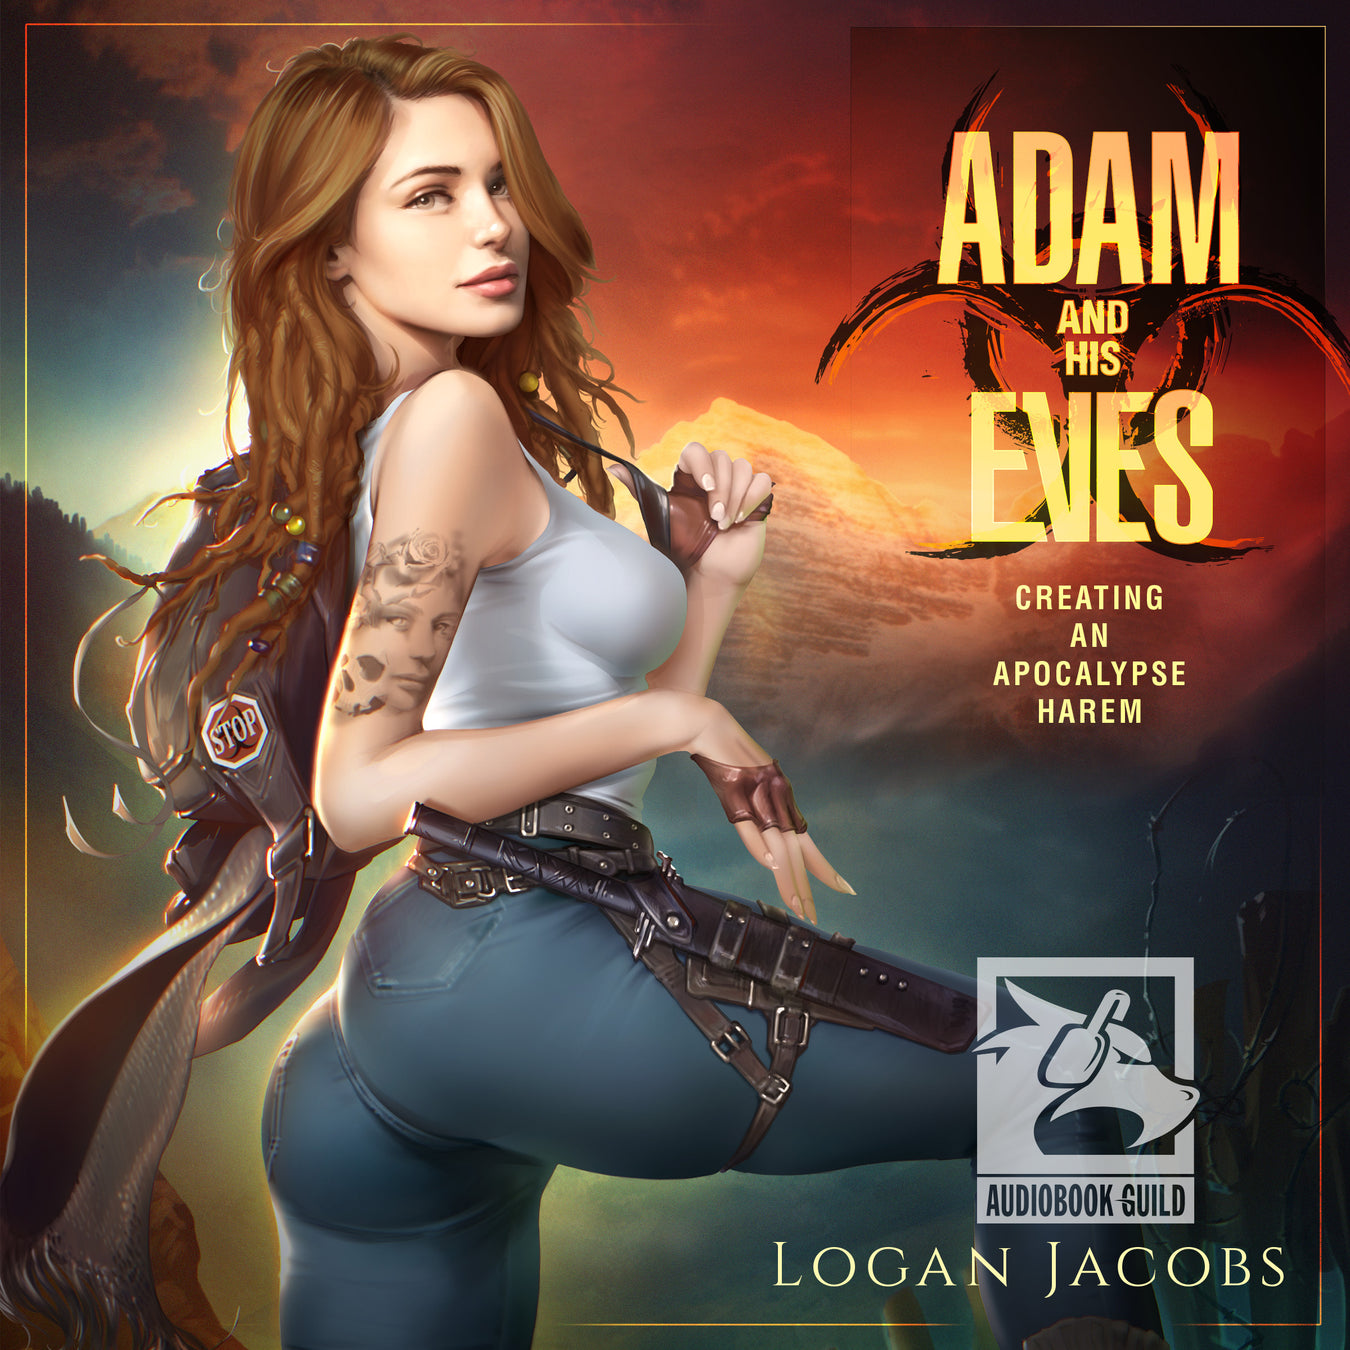 Adam and His Eves by Logan Jacobs